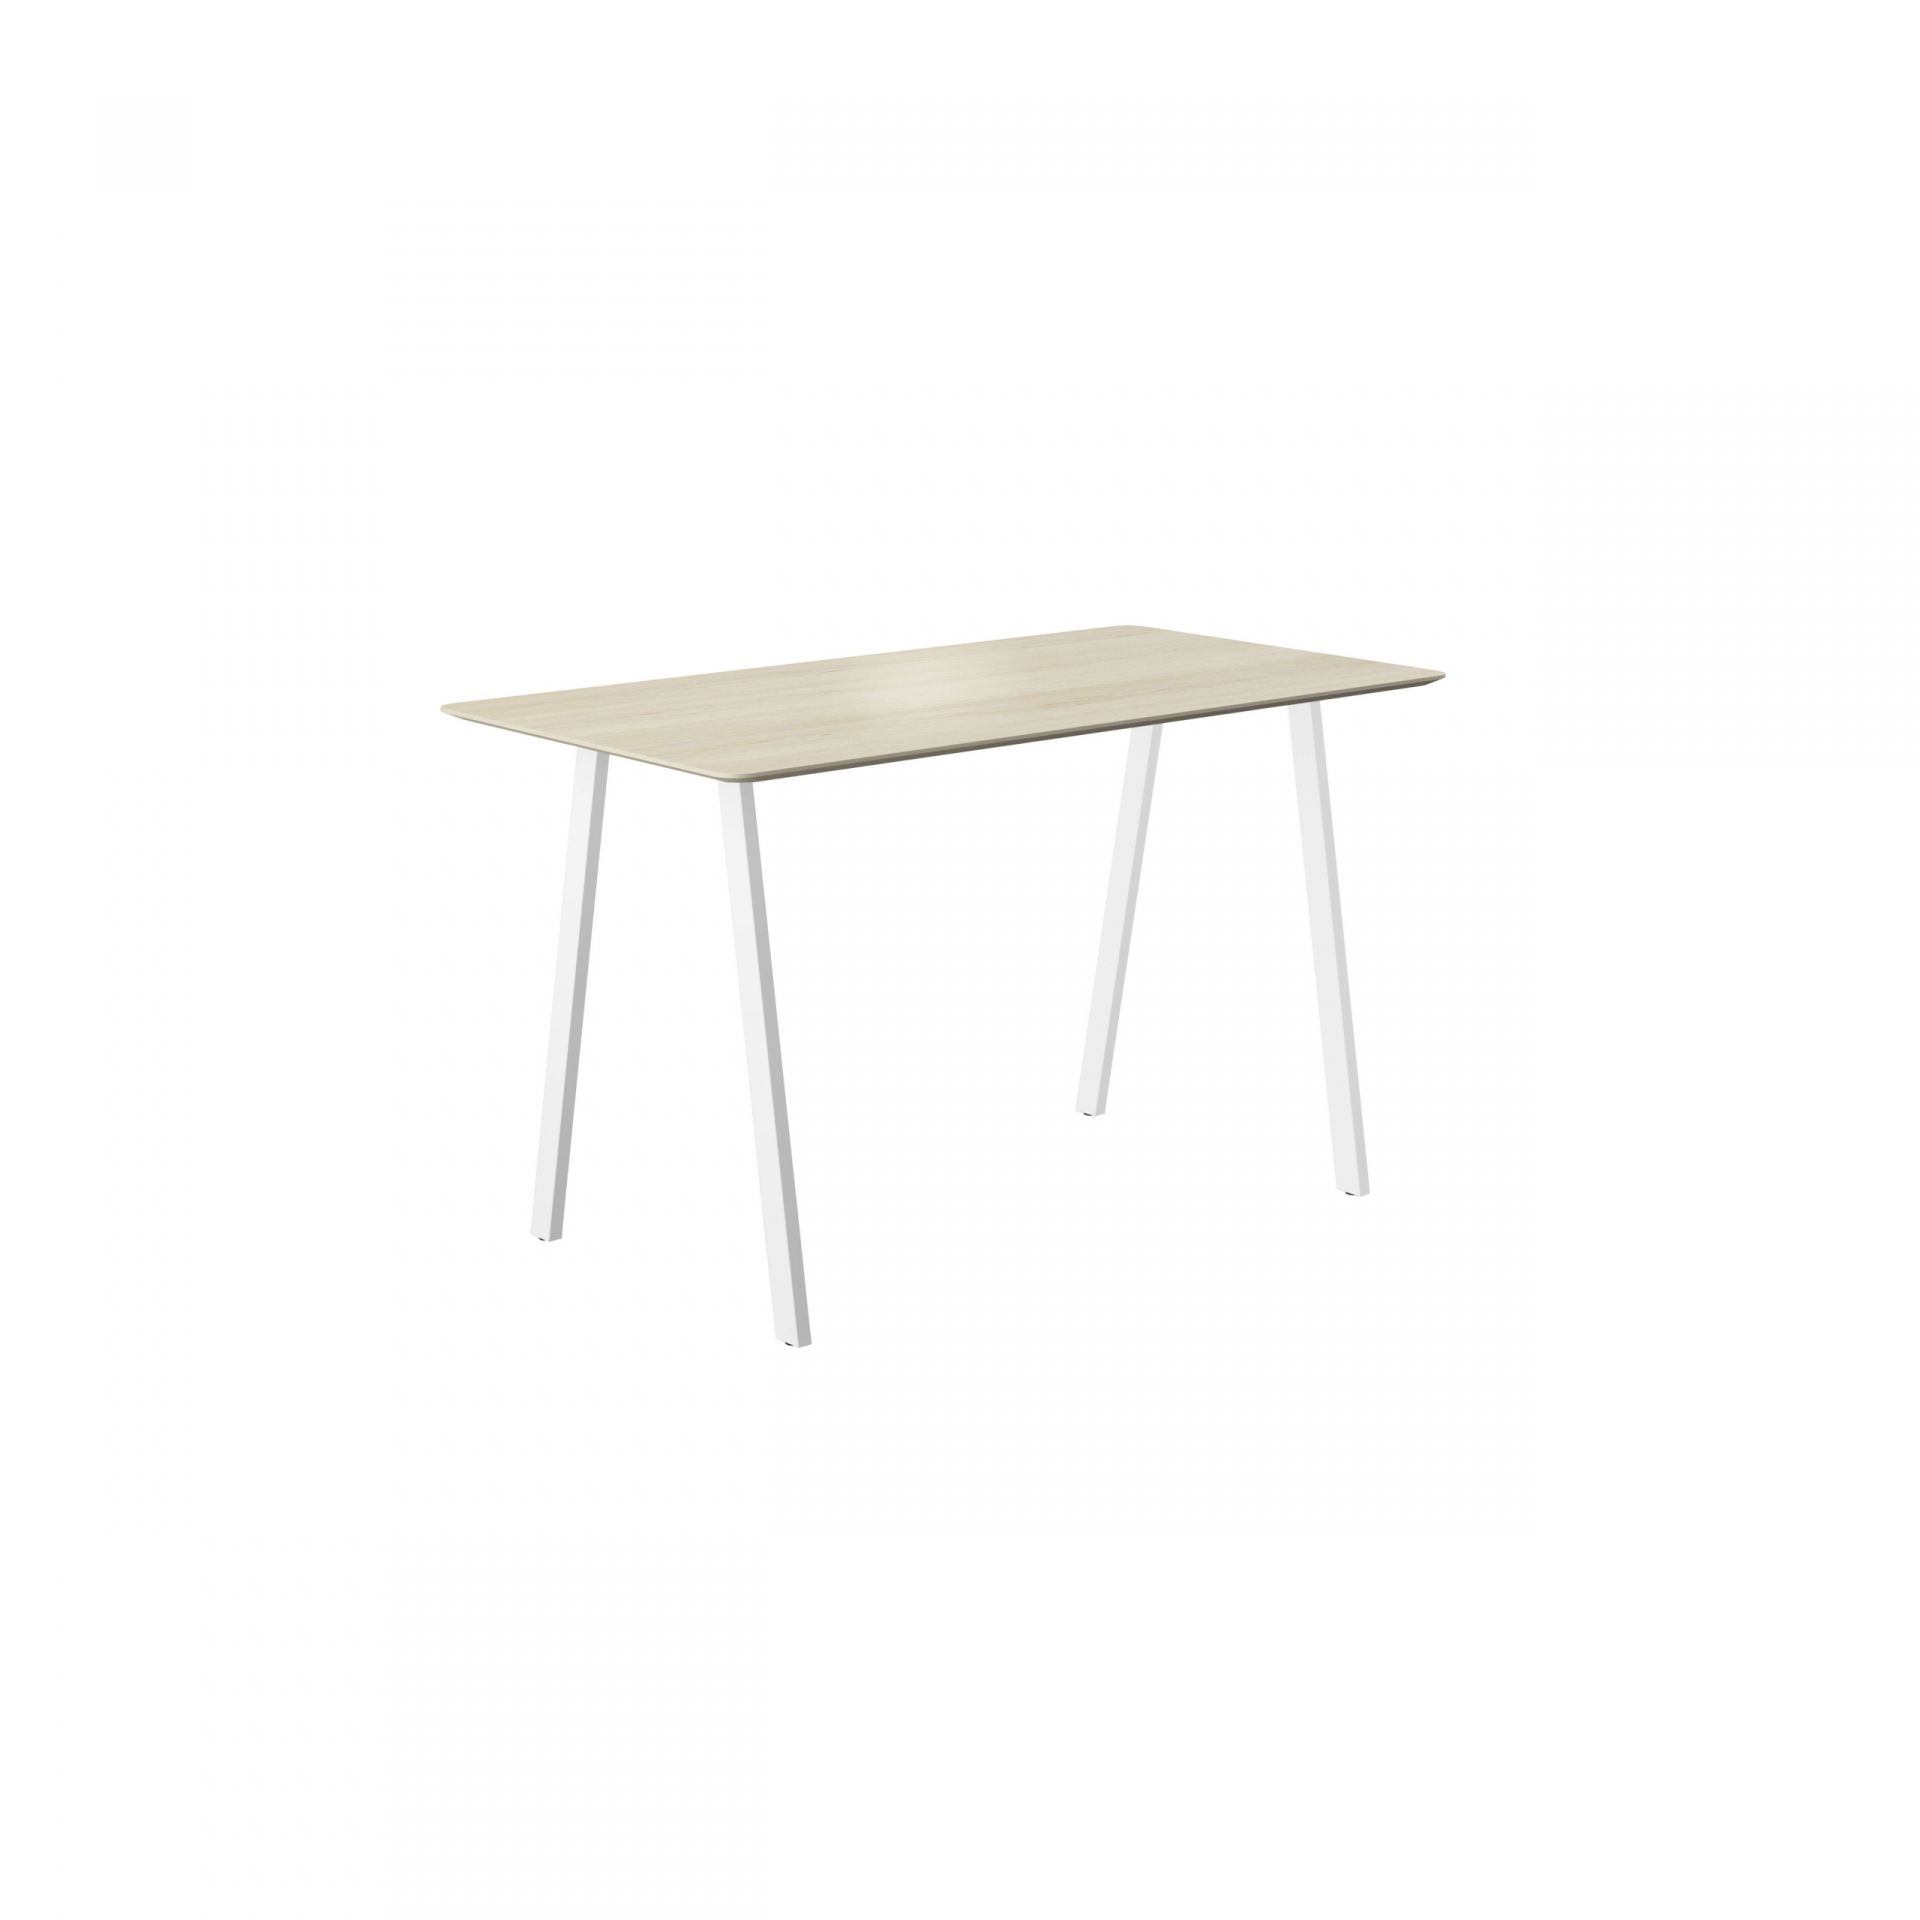 Collaborate Table with metal legs, high